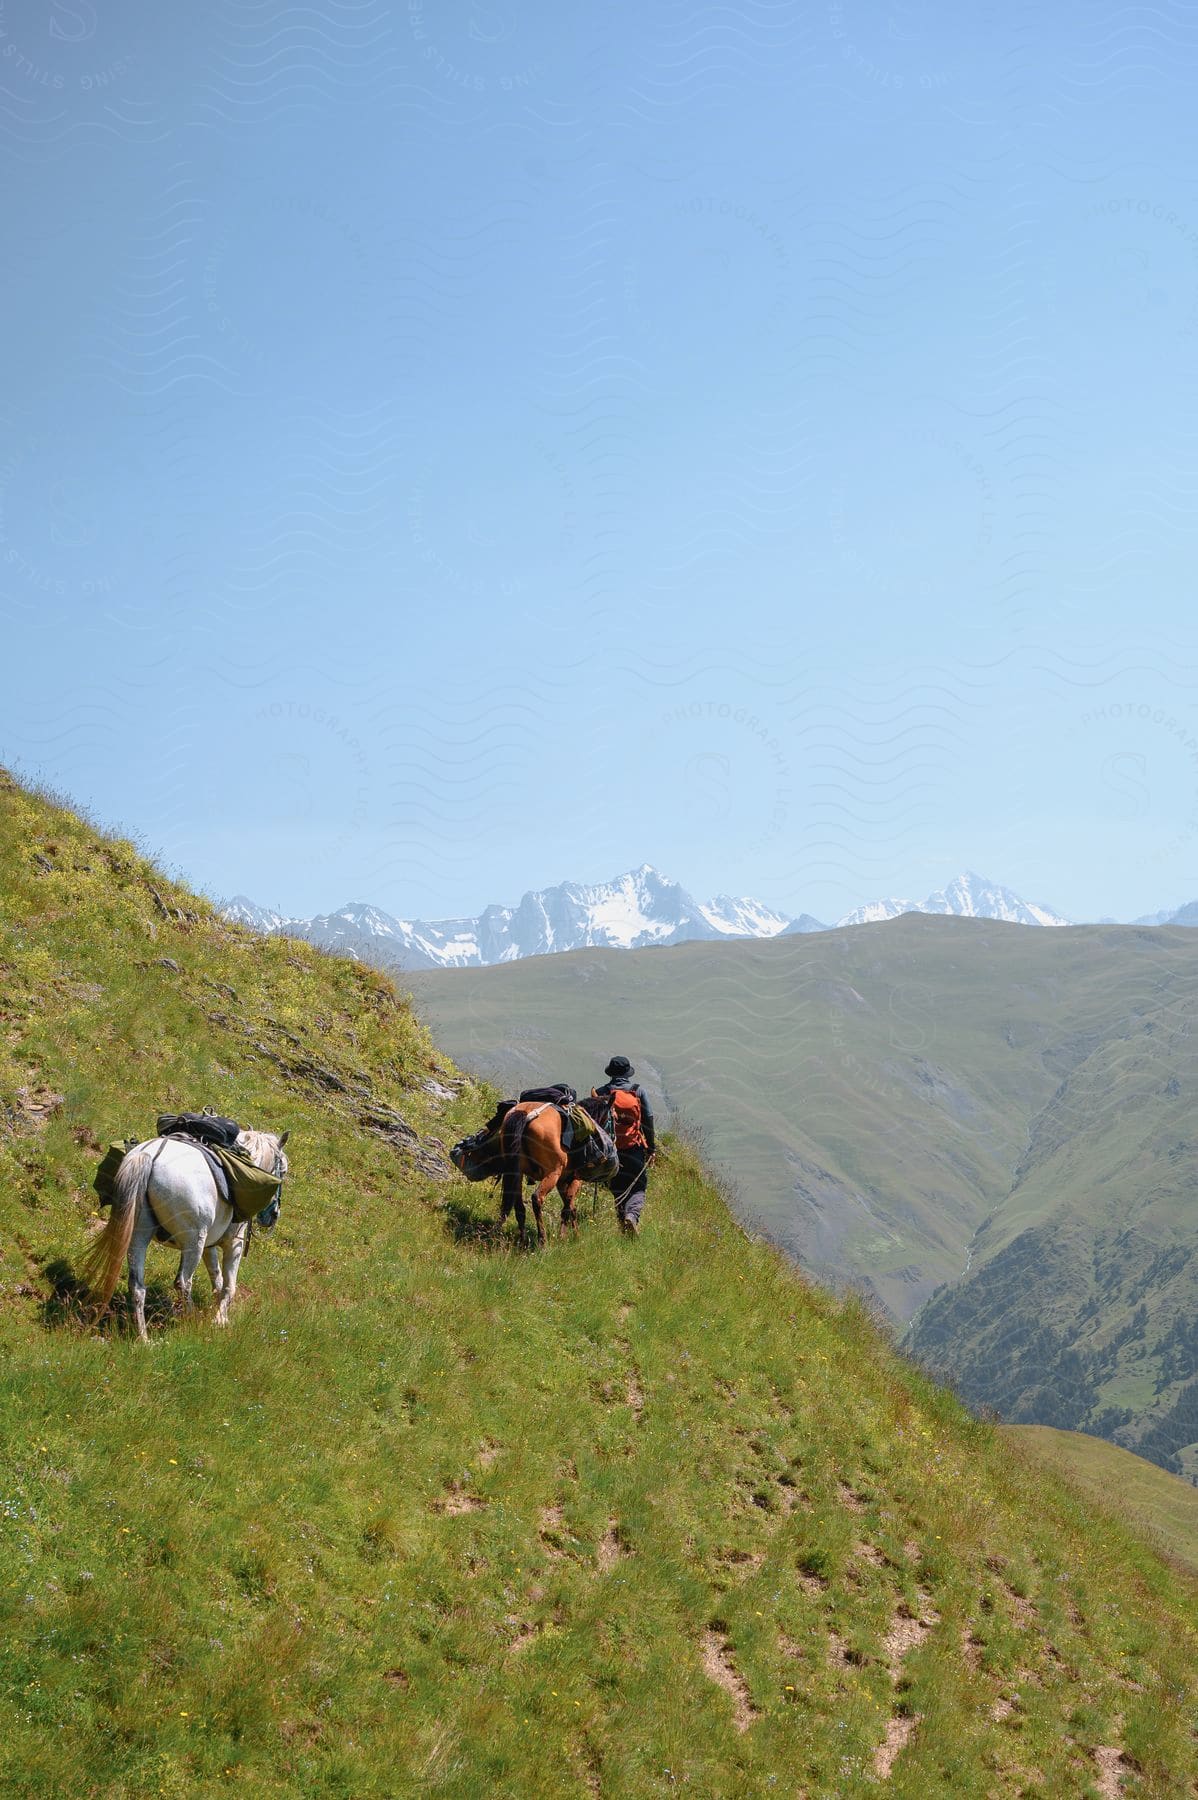 A person leads two horses loaded with packs across a grassy hill in the country of georgia